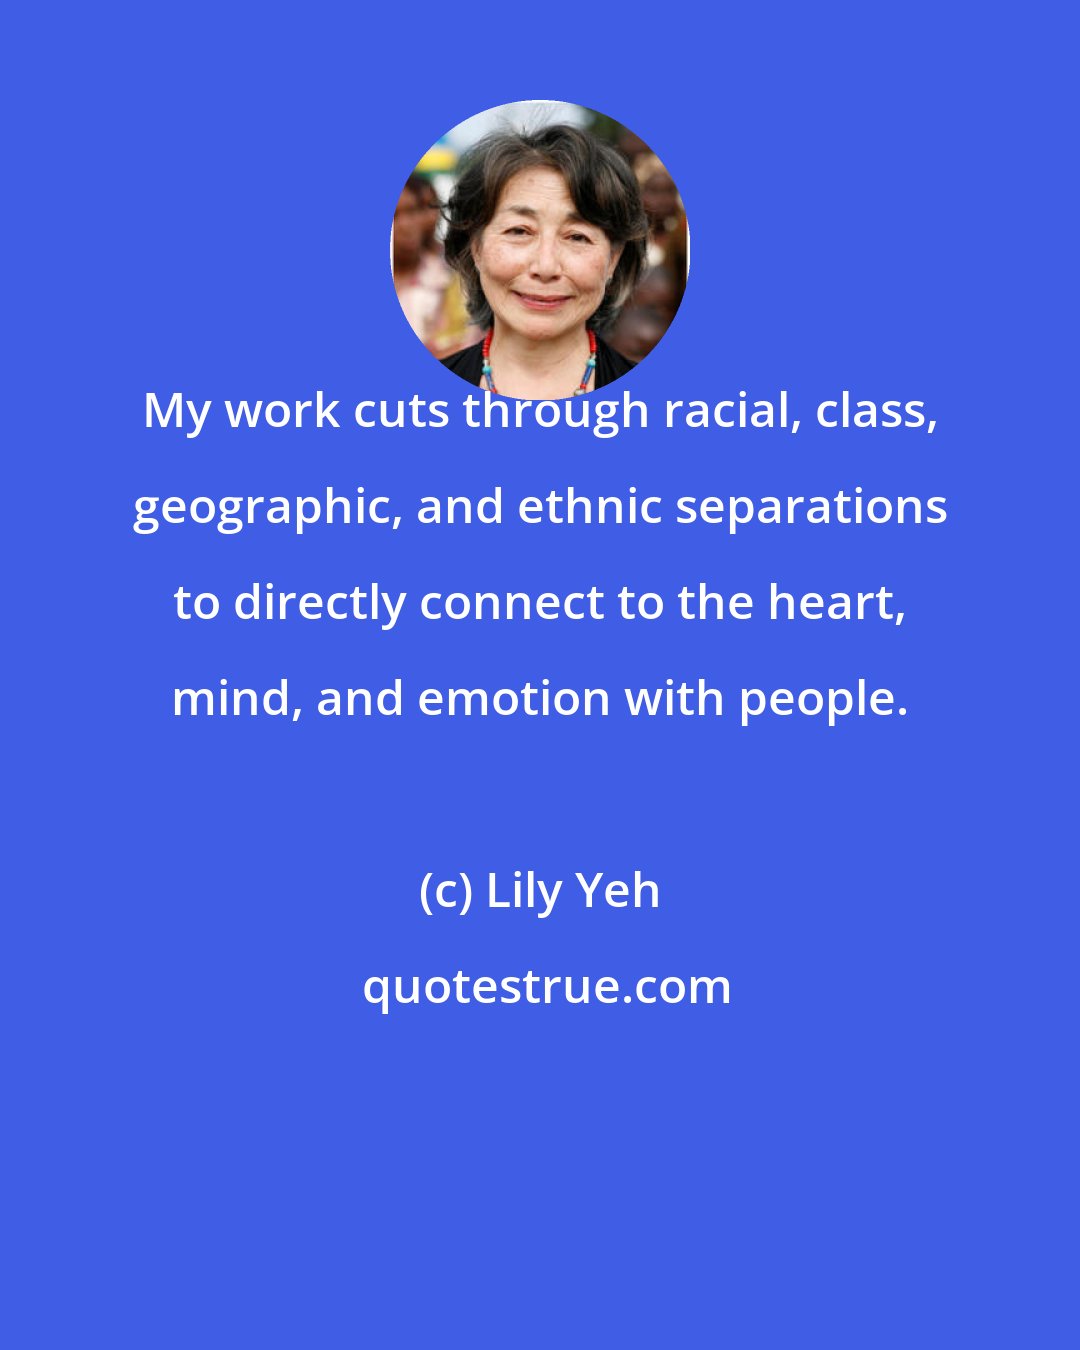 Lily Yeh: My work cuts through racial, class, geographic, and ethnic separations to directly connect to the heart, mind, and emotion with people.